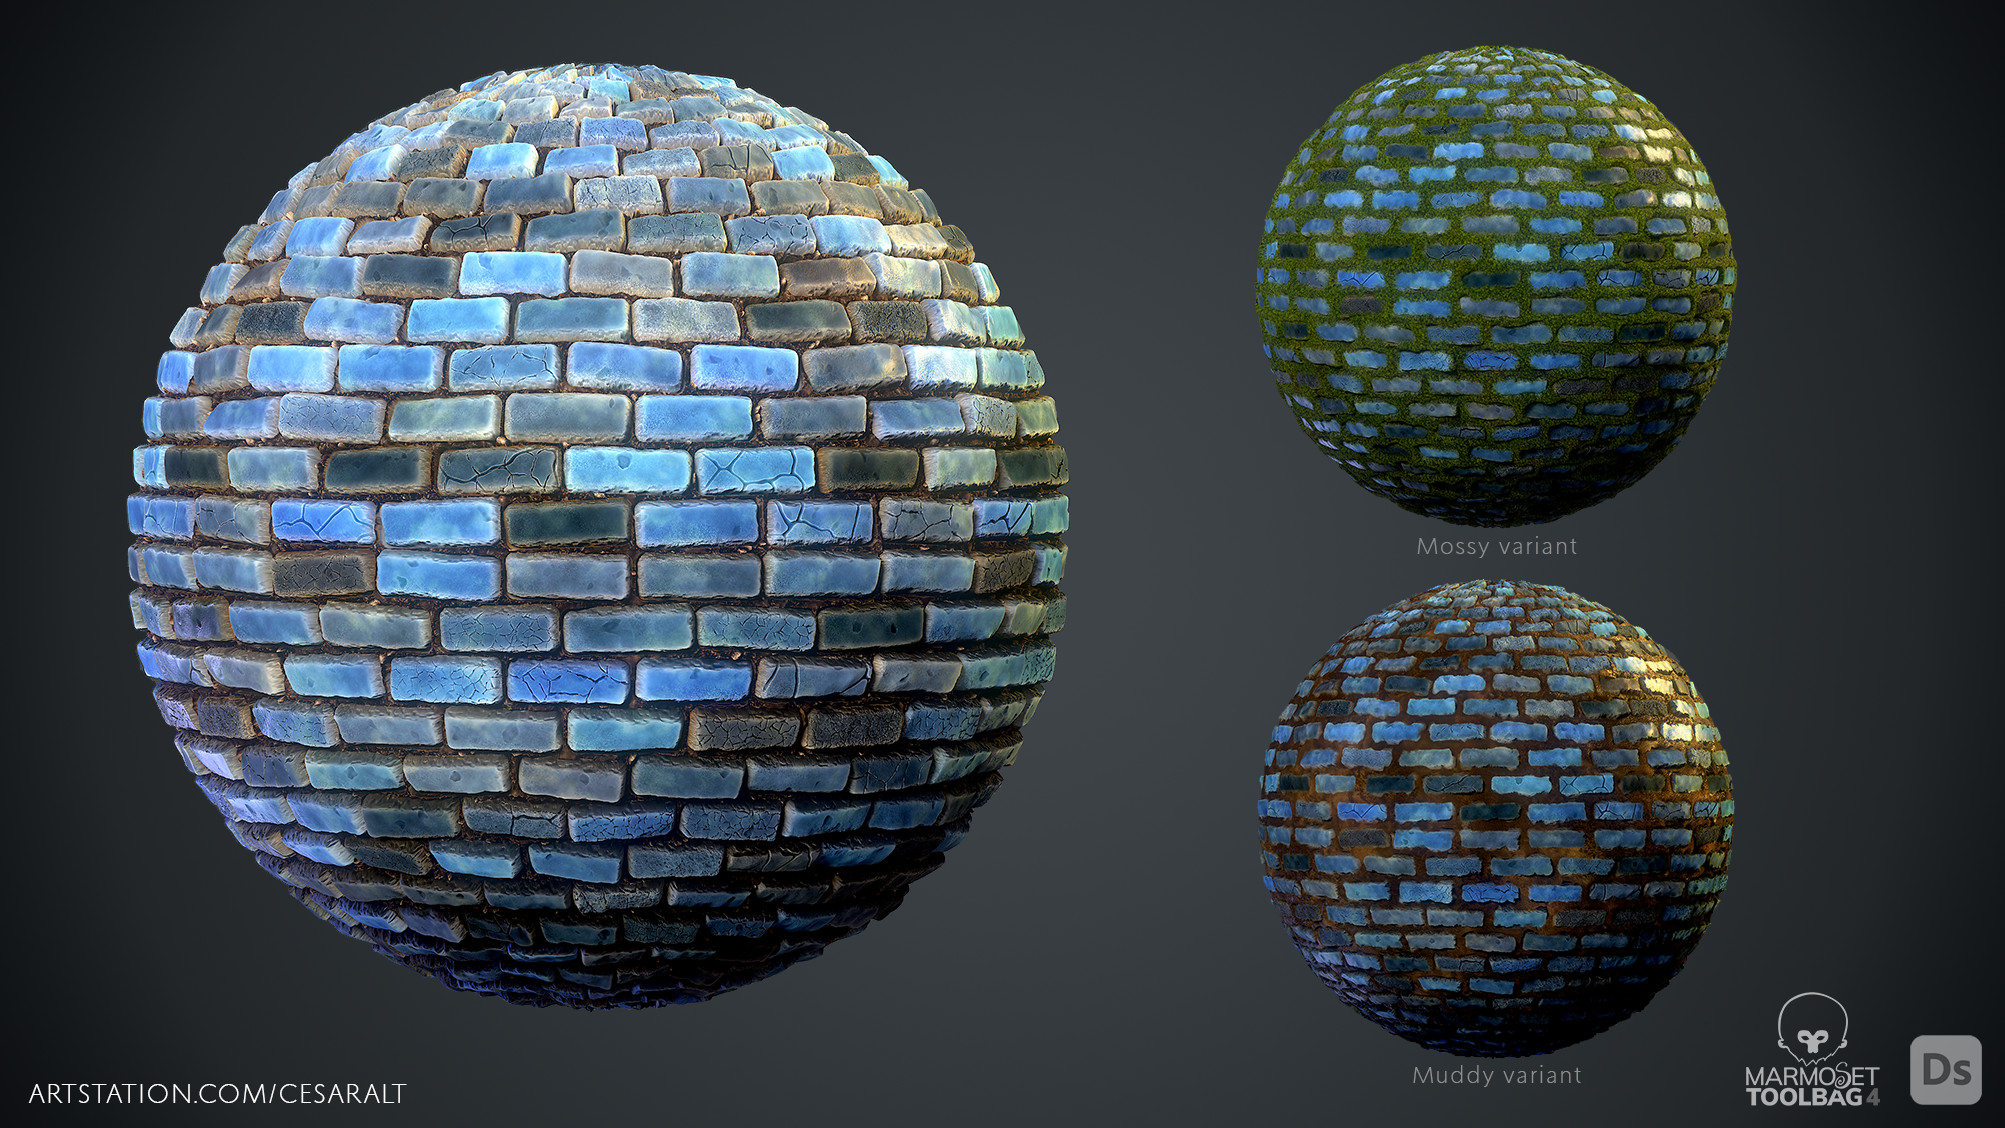 Cobblestone variants created from exposed parameters within the Substance Designer graph, to generate mud and dirt.